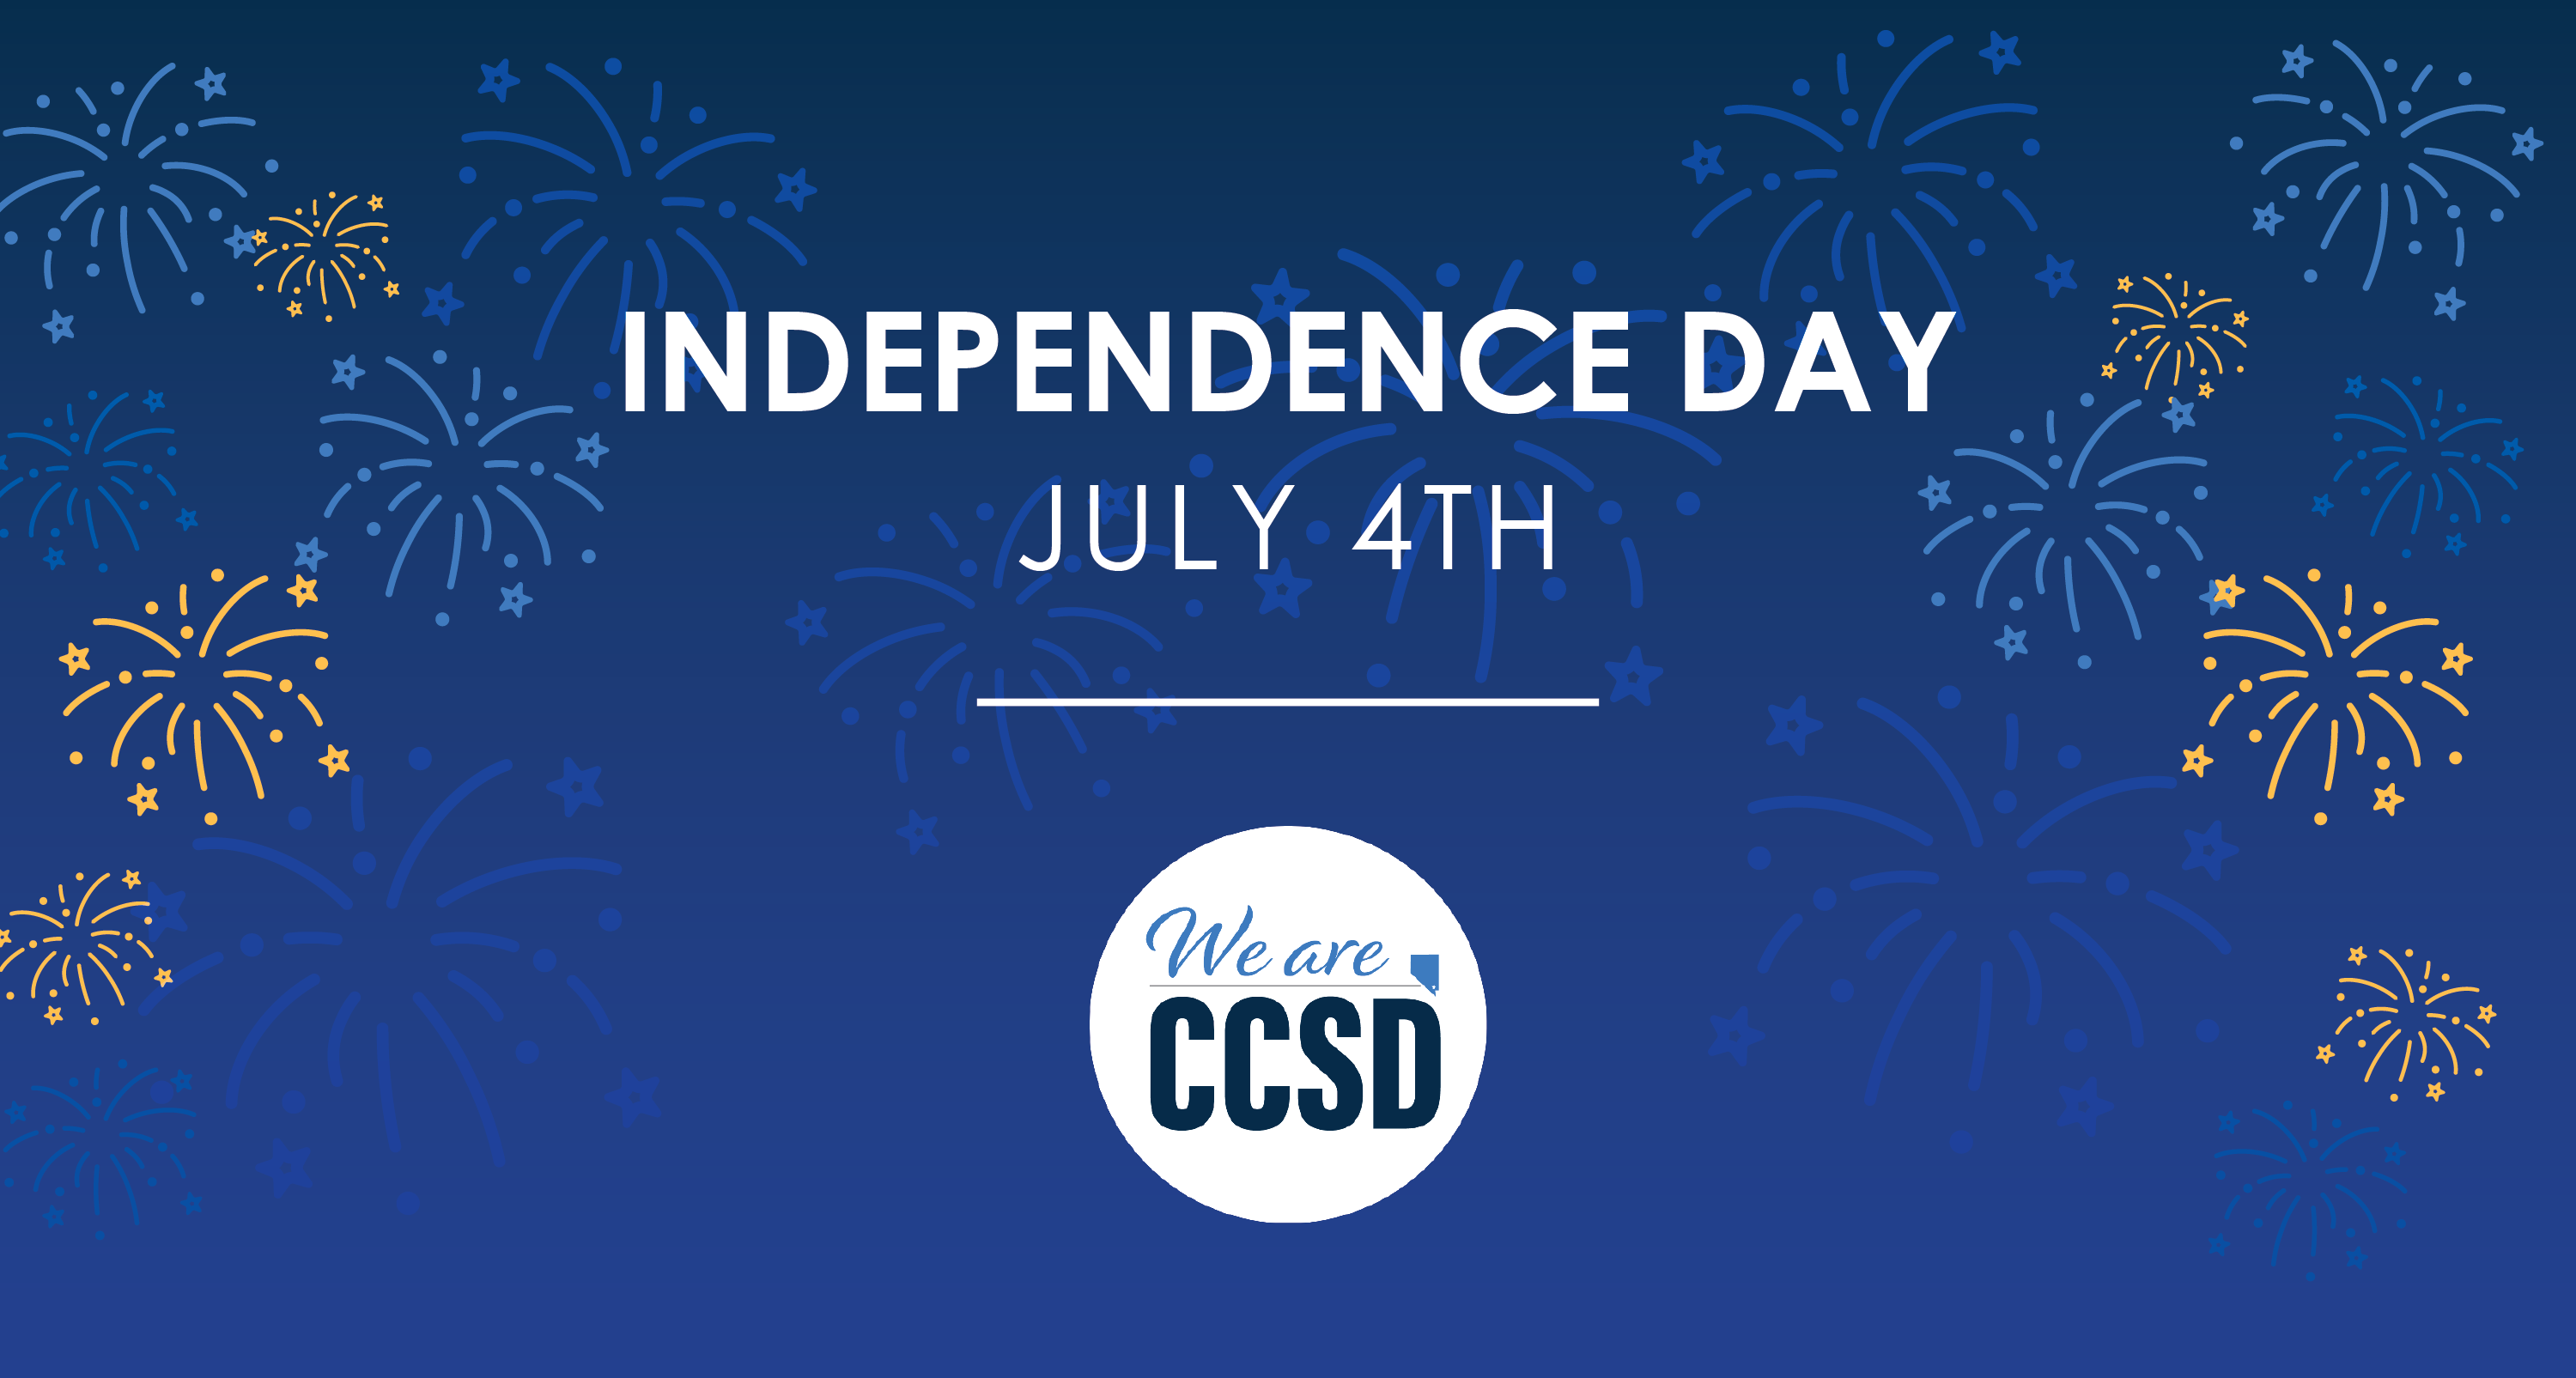 CCSD offices closed July 4 for Independence Day